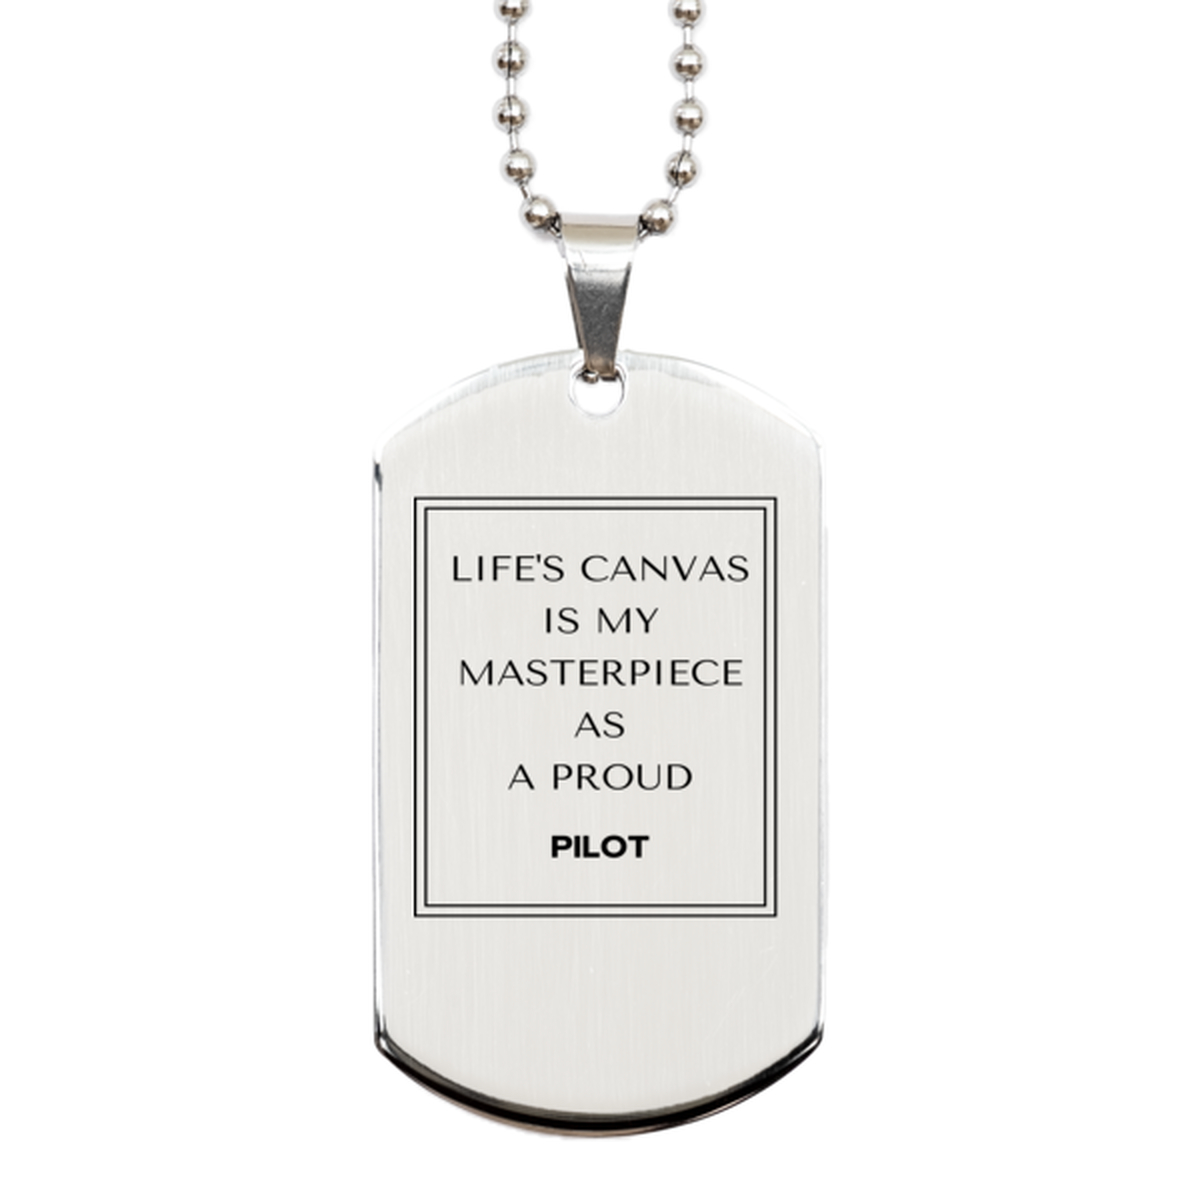 Proud Pilot Gifts, Life's canvas is my masterpiece, Epic Birthday Christmas Unique Silver Dog Tag For Pilot, Coworkers, Men, Women, Friends